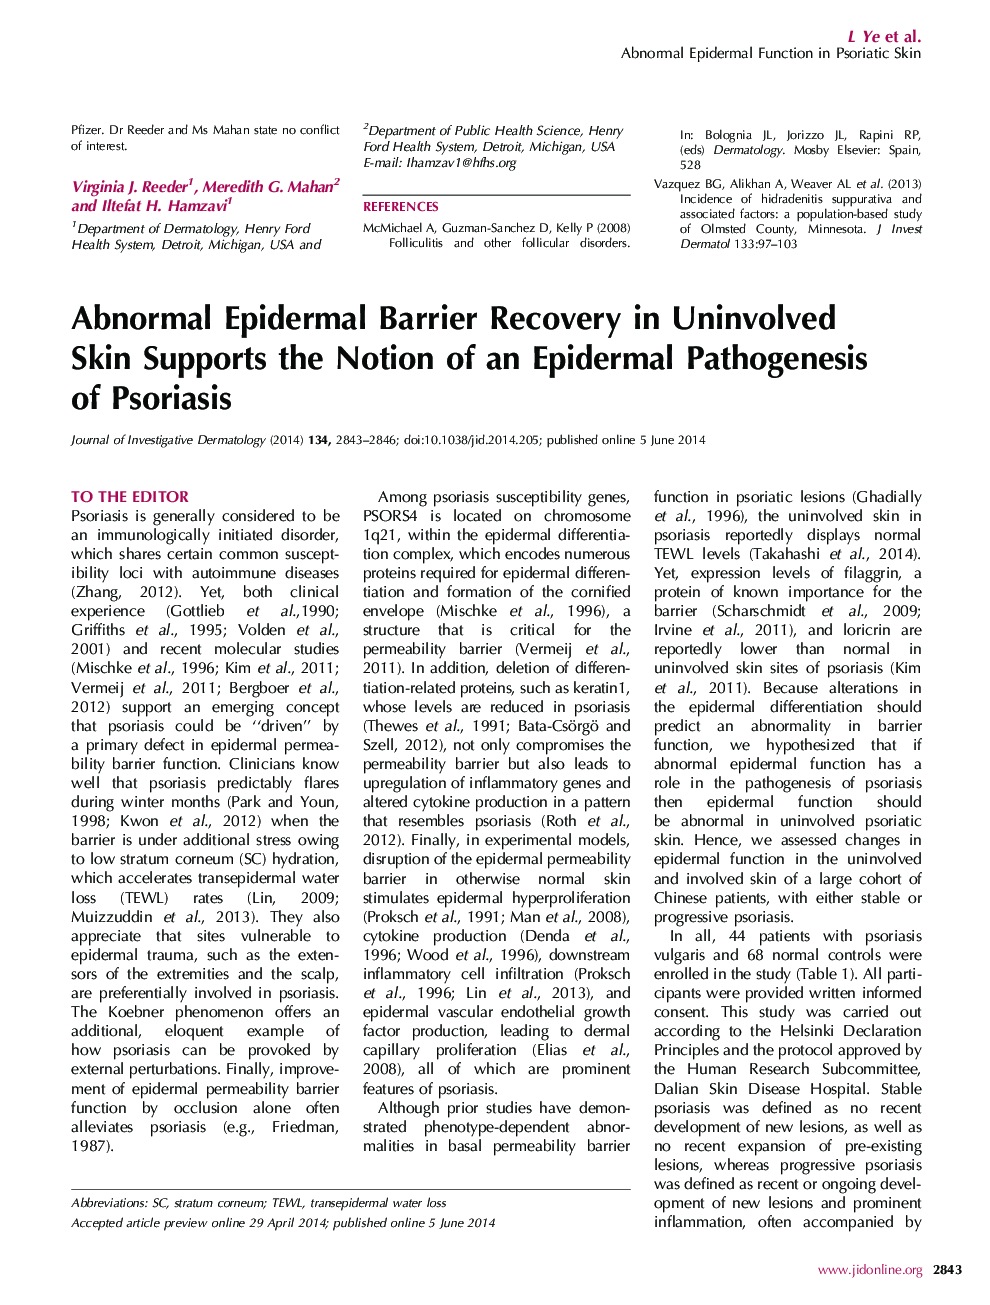 Abnormal Epidermal Barrier Recovery in Uninvolved Skin Supports the Notion of an Epidermal Pathogenesis of Psoriasis